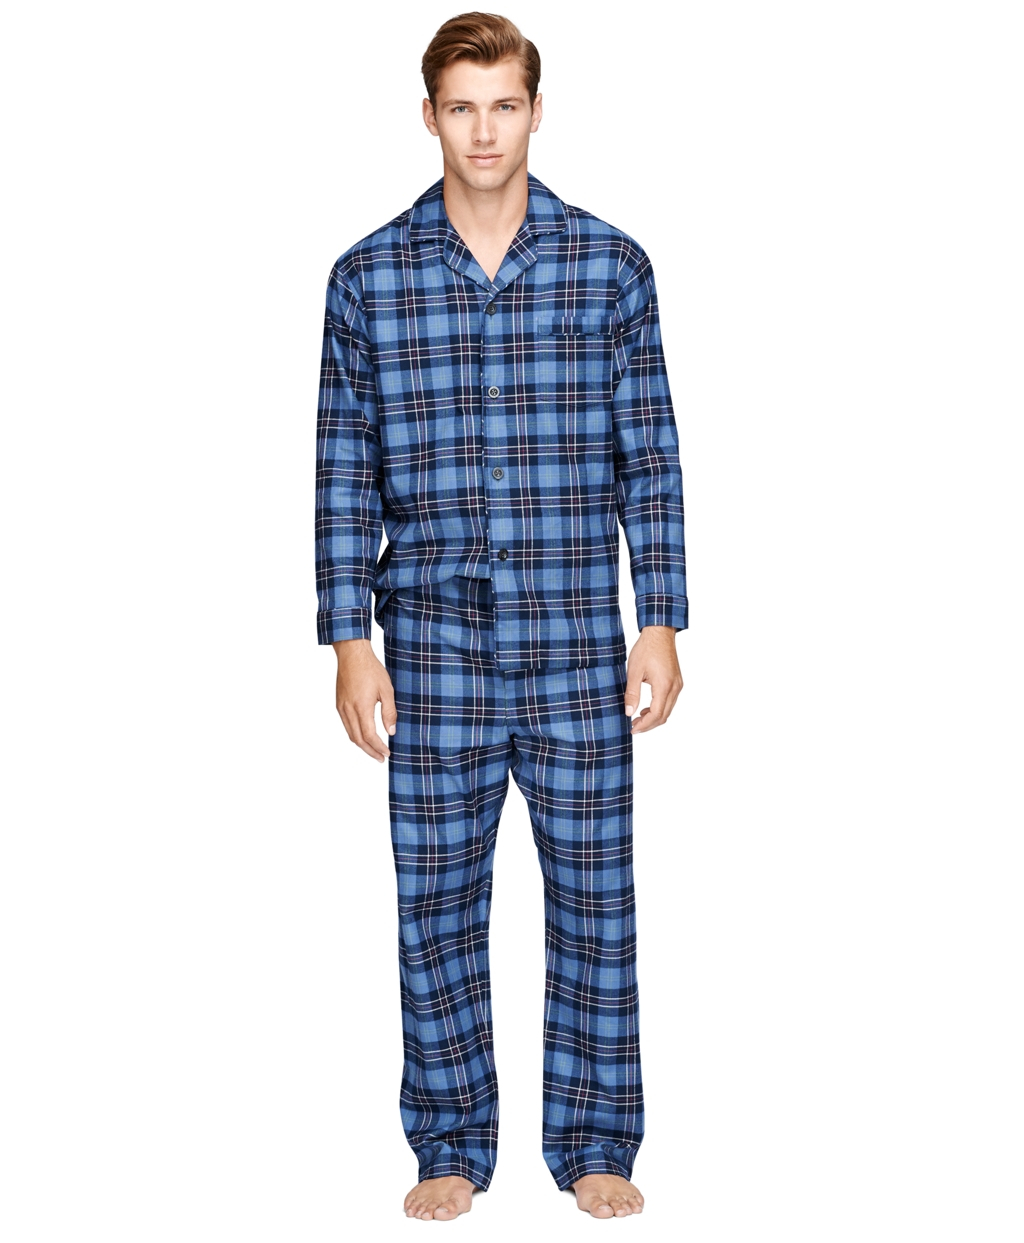 Brooks Brothers Tartan Flannel Pajamas in Navy (Blue) for Men - Lyst